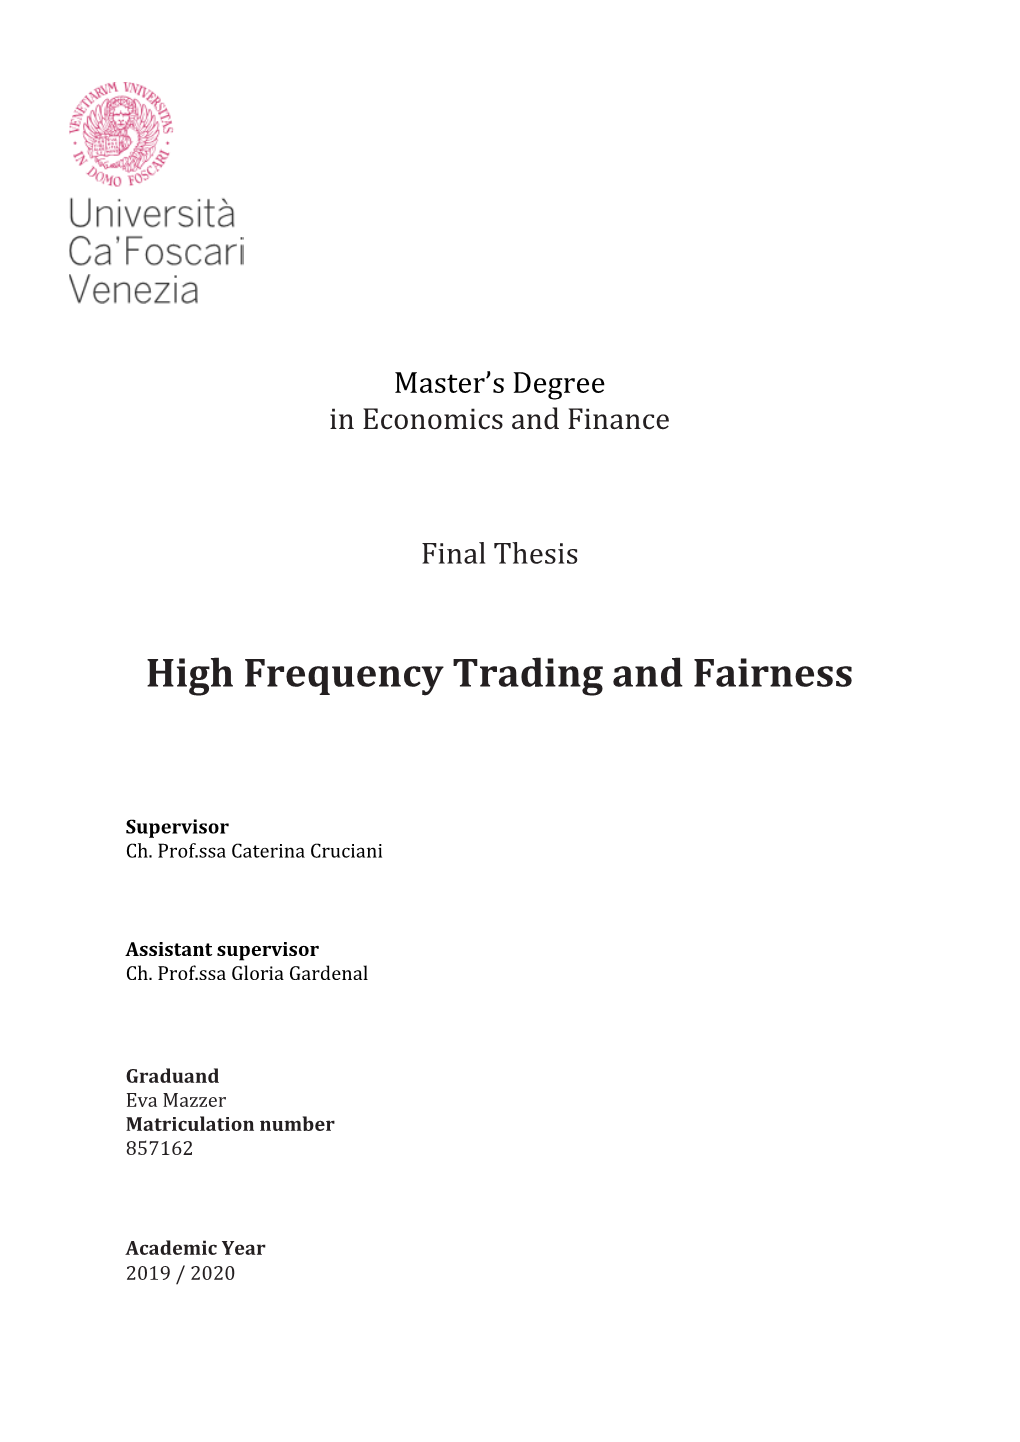 High Frequency Trading and Fairness